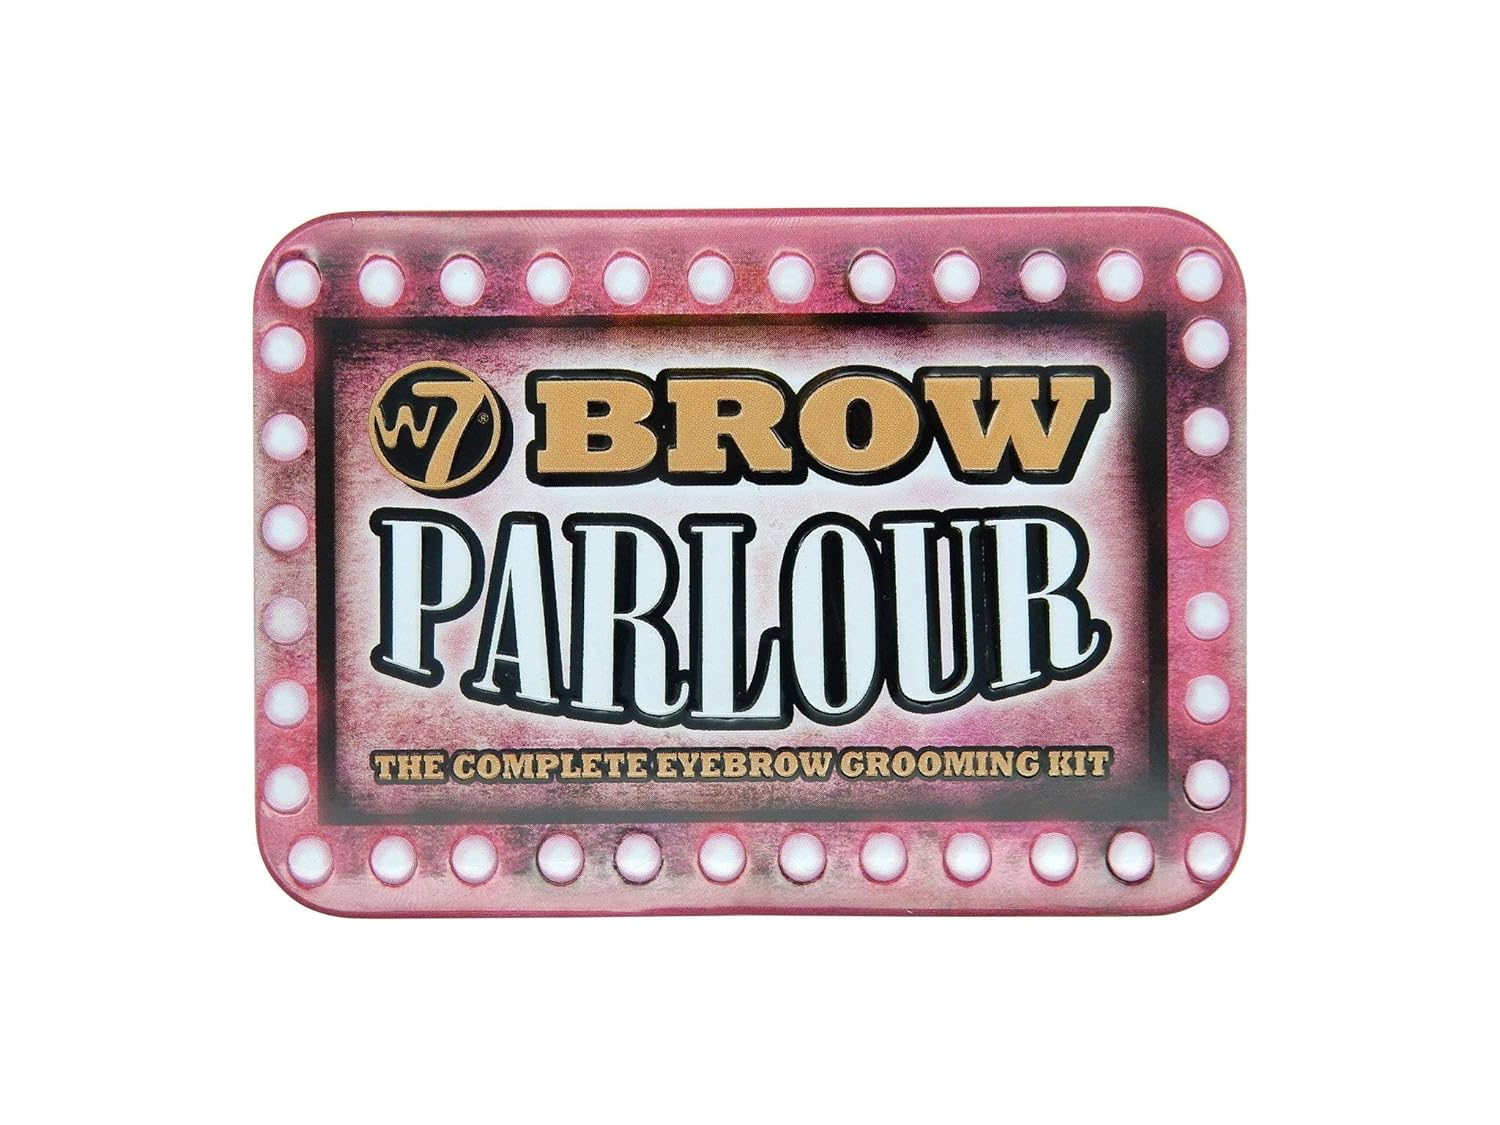 W7 Brow Parlour The Complete Eyebrow Grooming Kit with free brush and tweezer